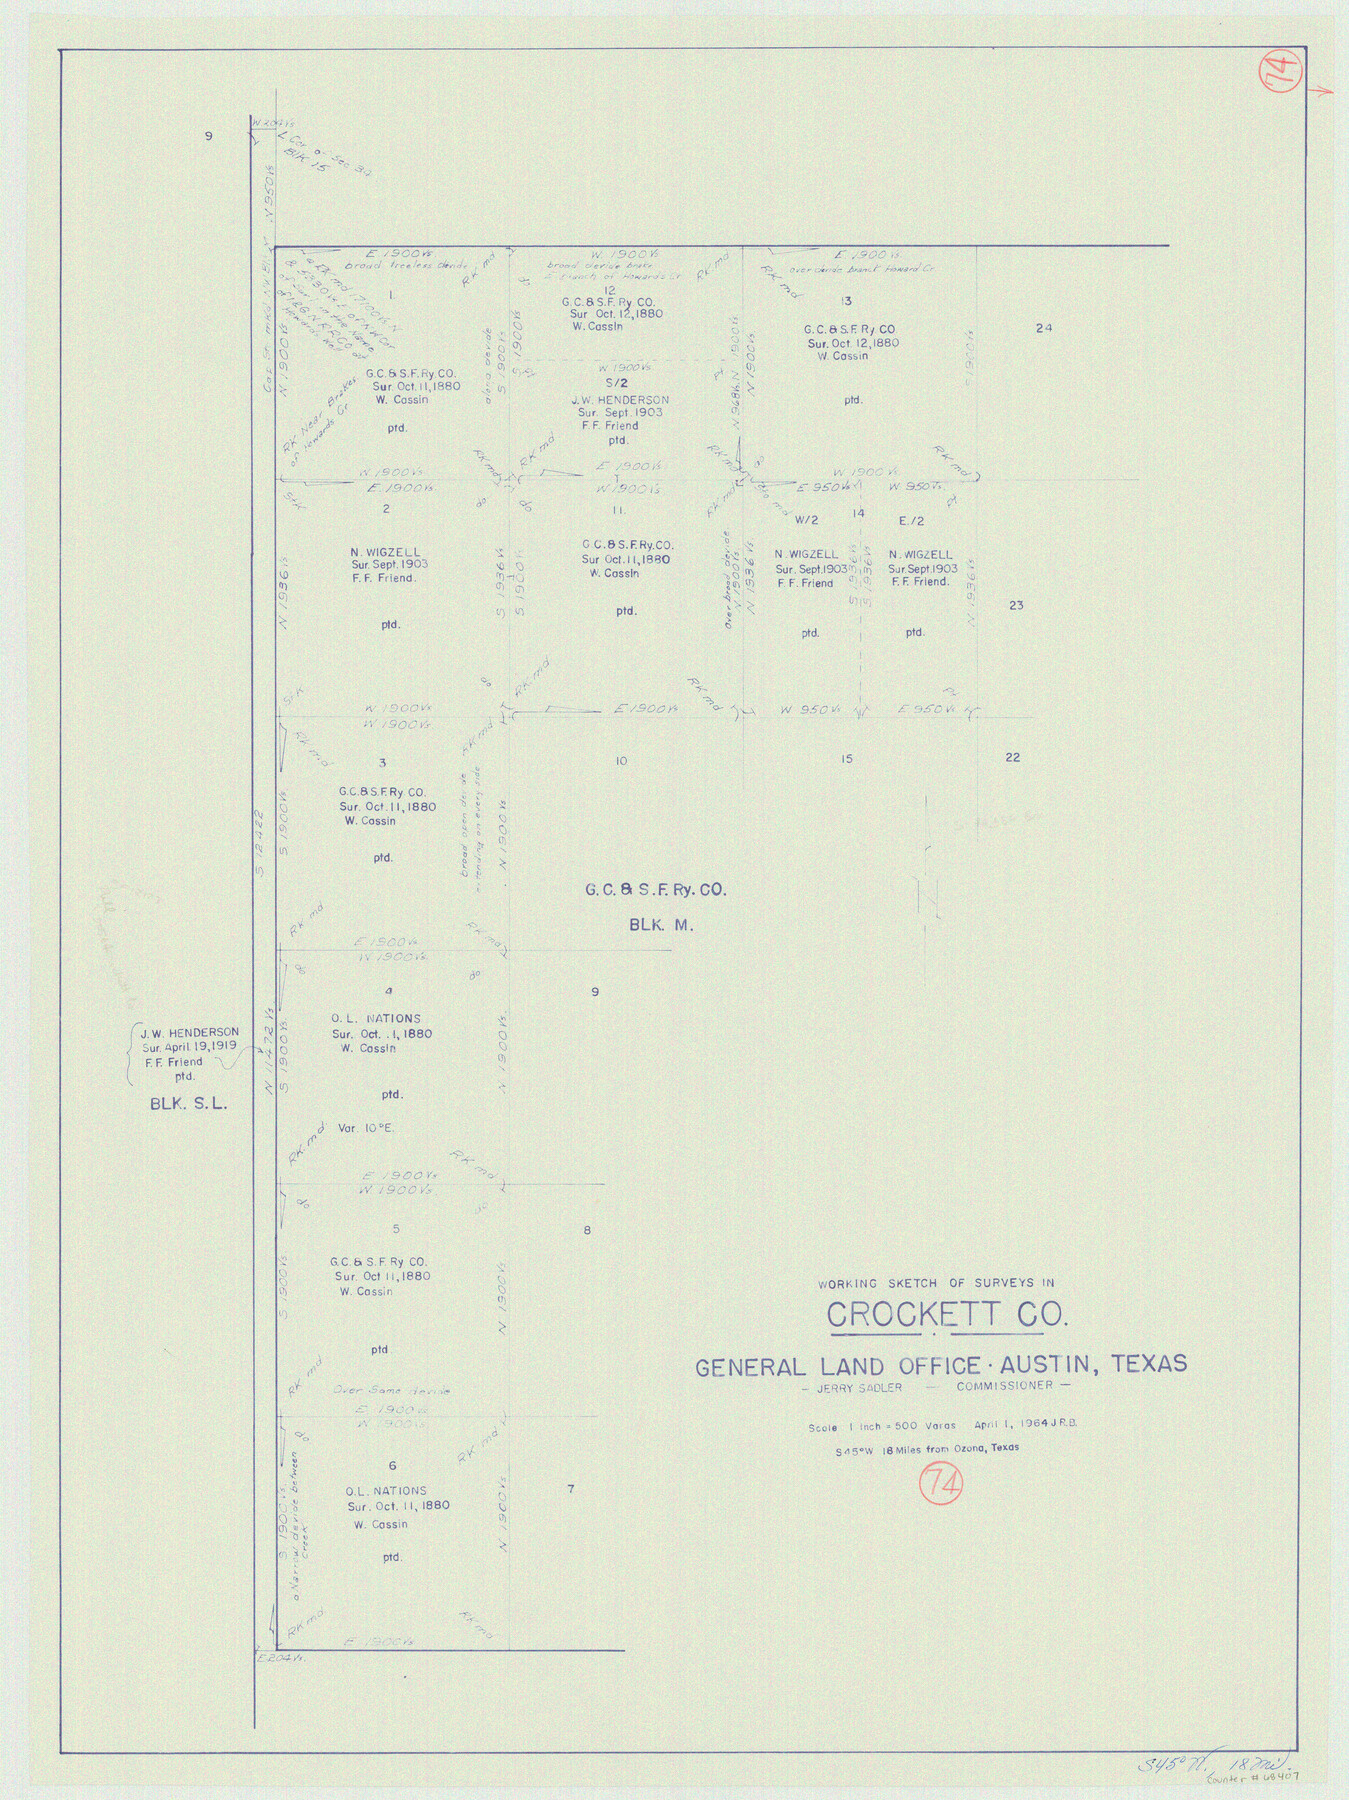 68407, Crockett County Working Sketch 74, General Map Collection